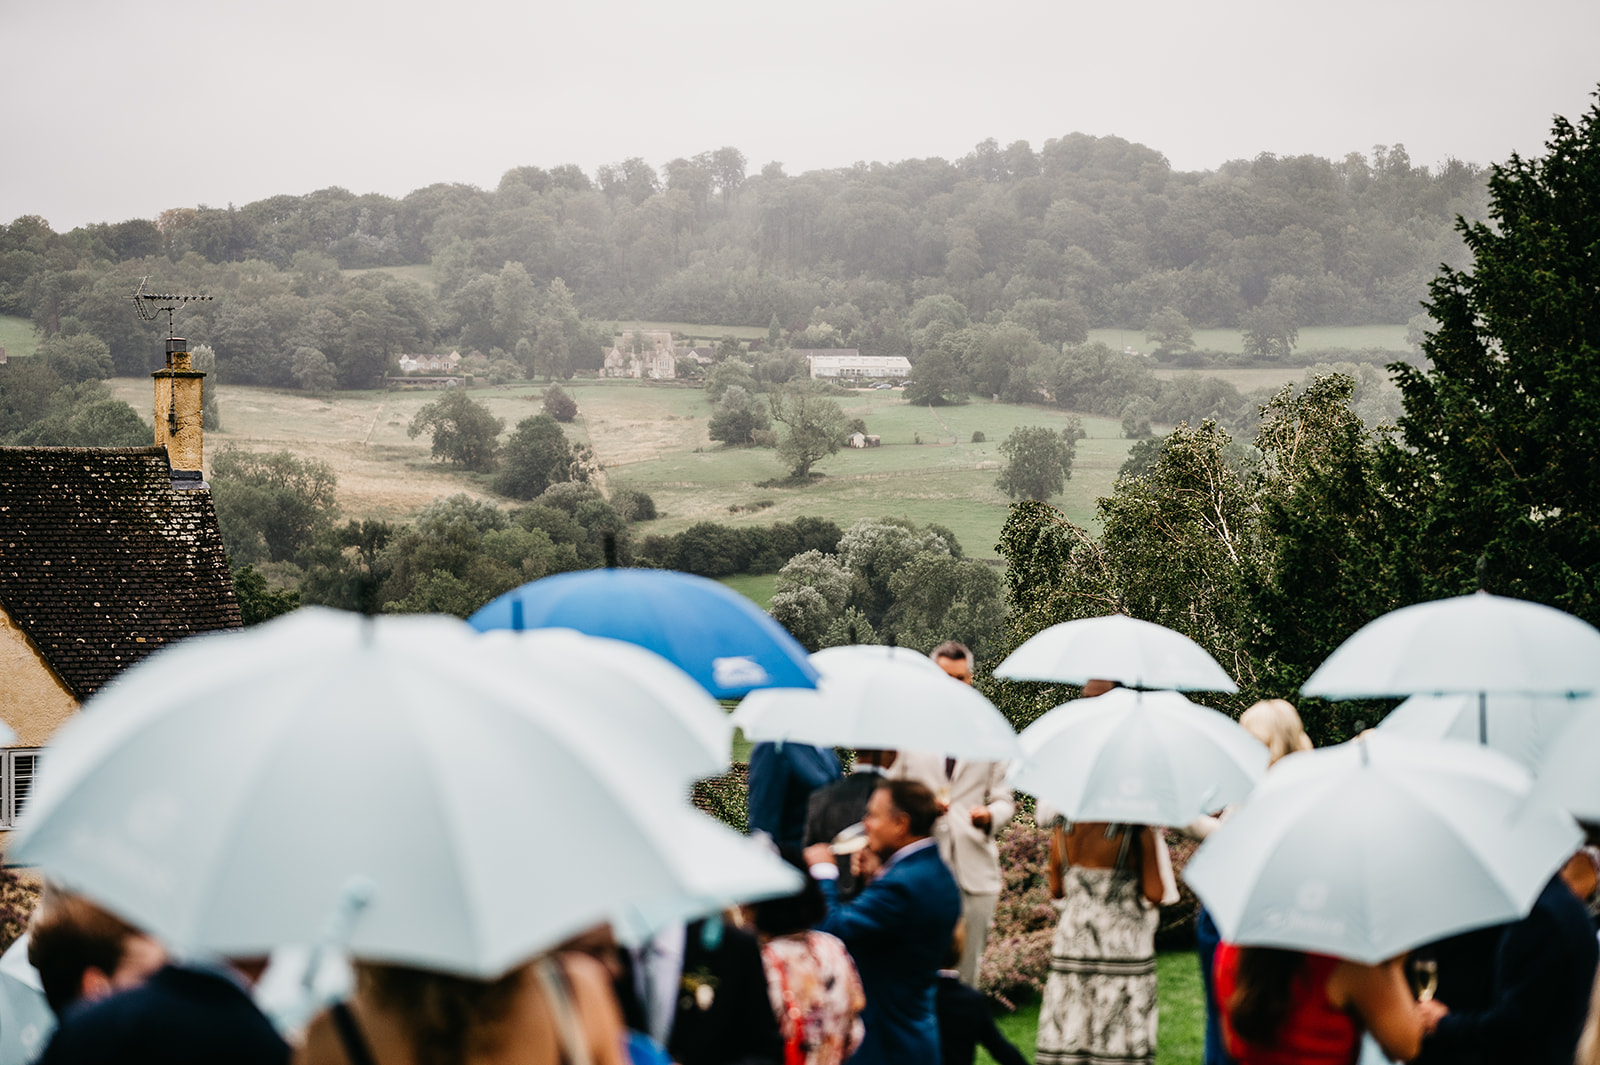 Cotswolds wedding guests with umbrellas